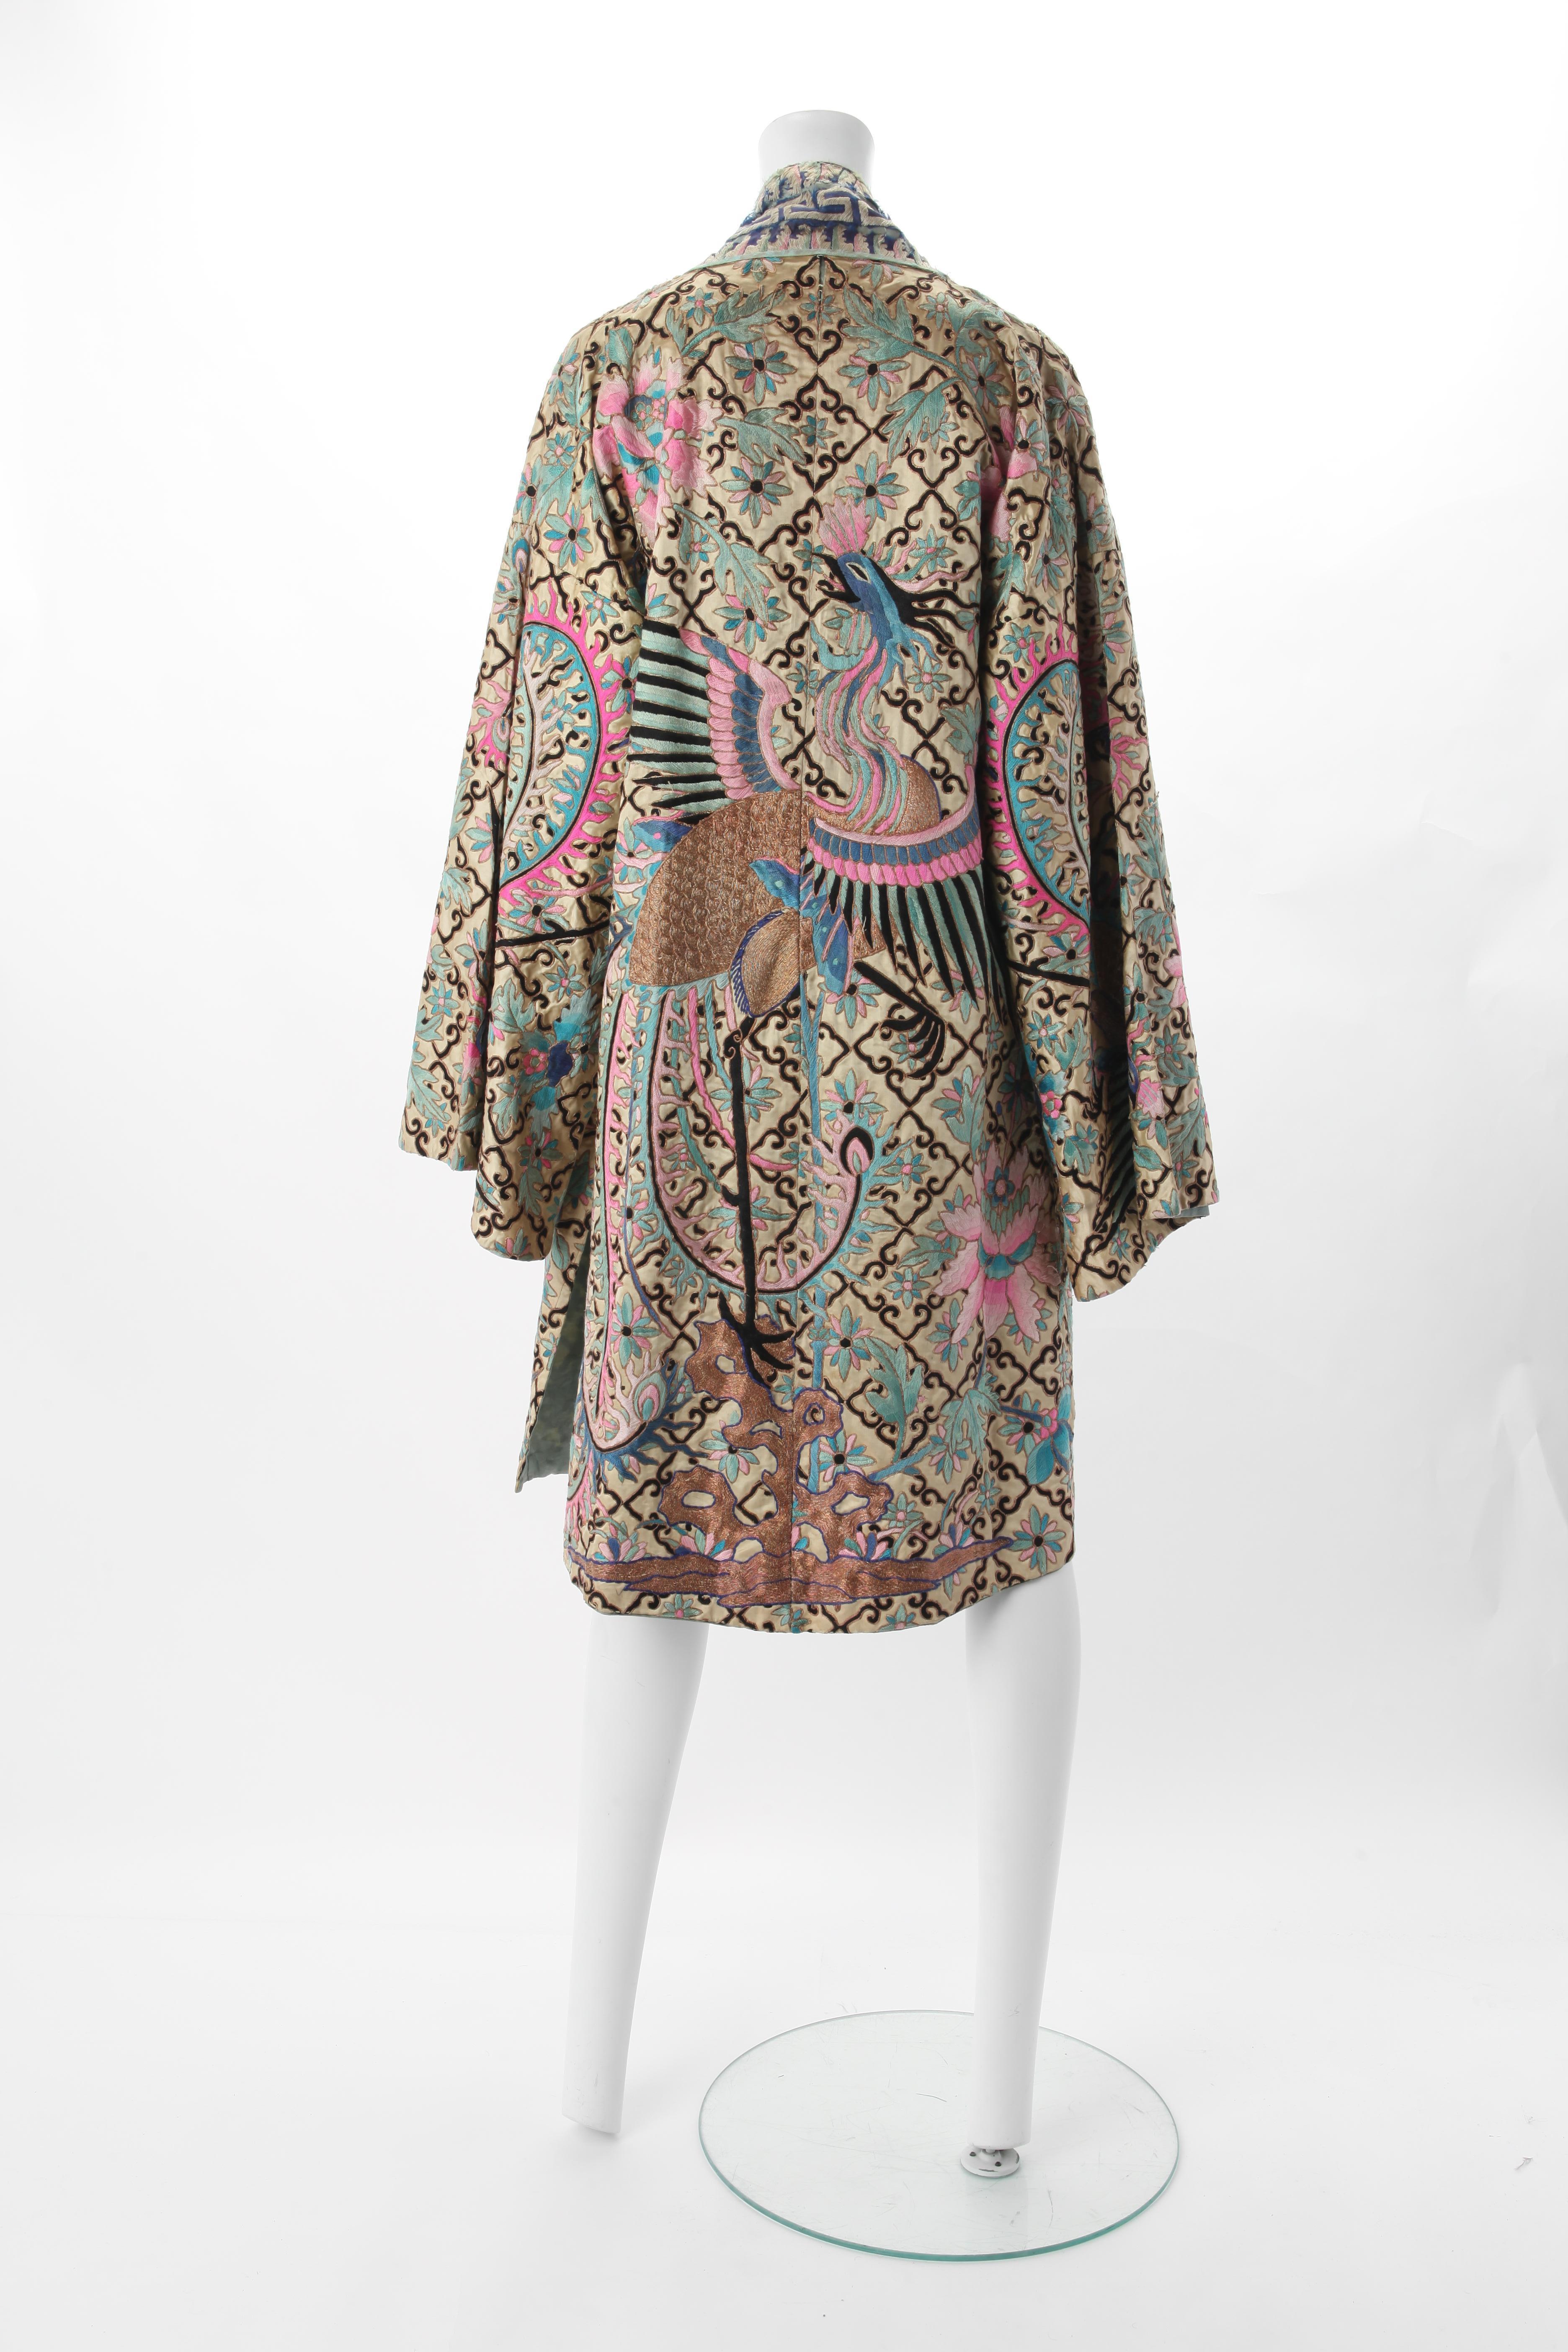 Embroidered Chinese Export Robe, Early 20th Century.
Cream silk satin robe with all over embroidery in shades of blue, pink, black & metallic gold. Dominant motif of peacock and flowers against the diamond grid.
Fits US Size 0 to 6.
